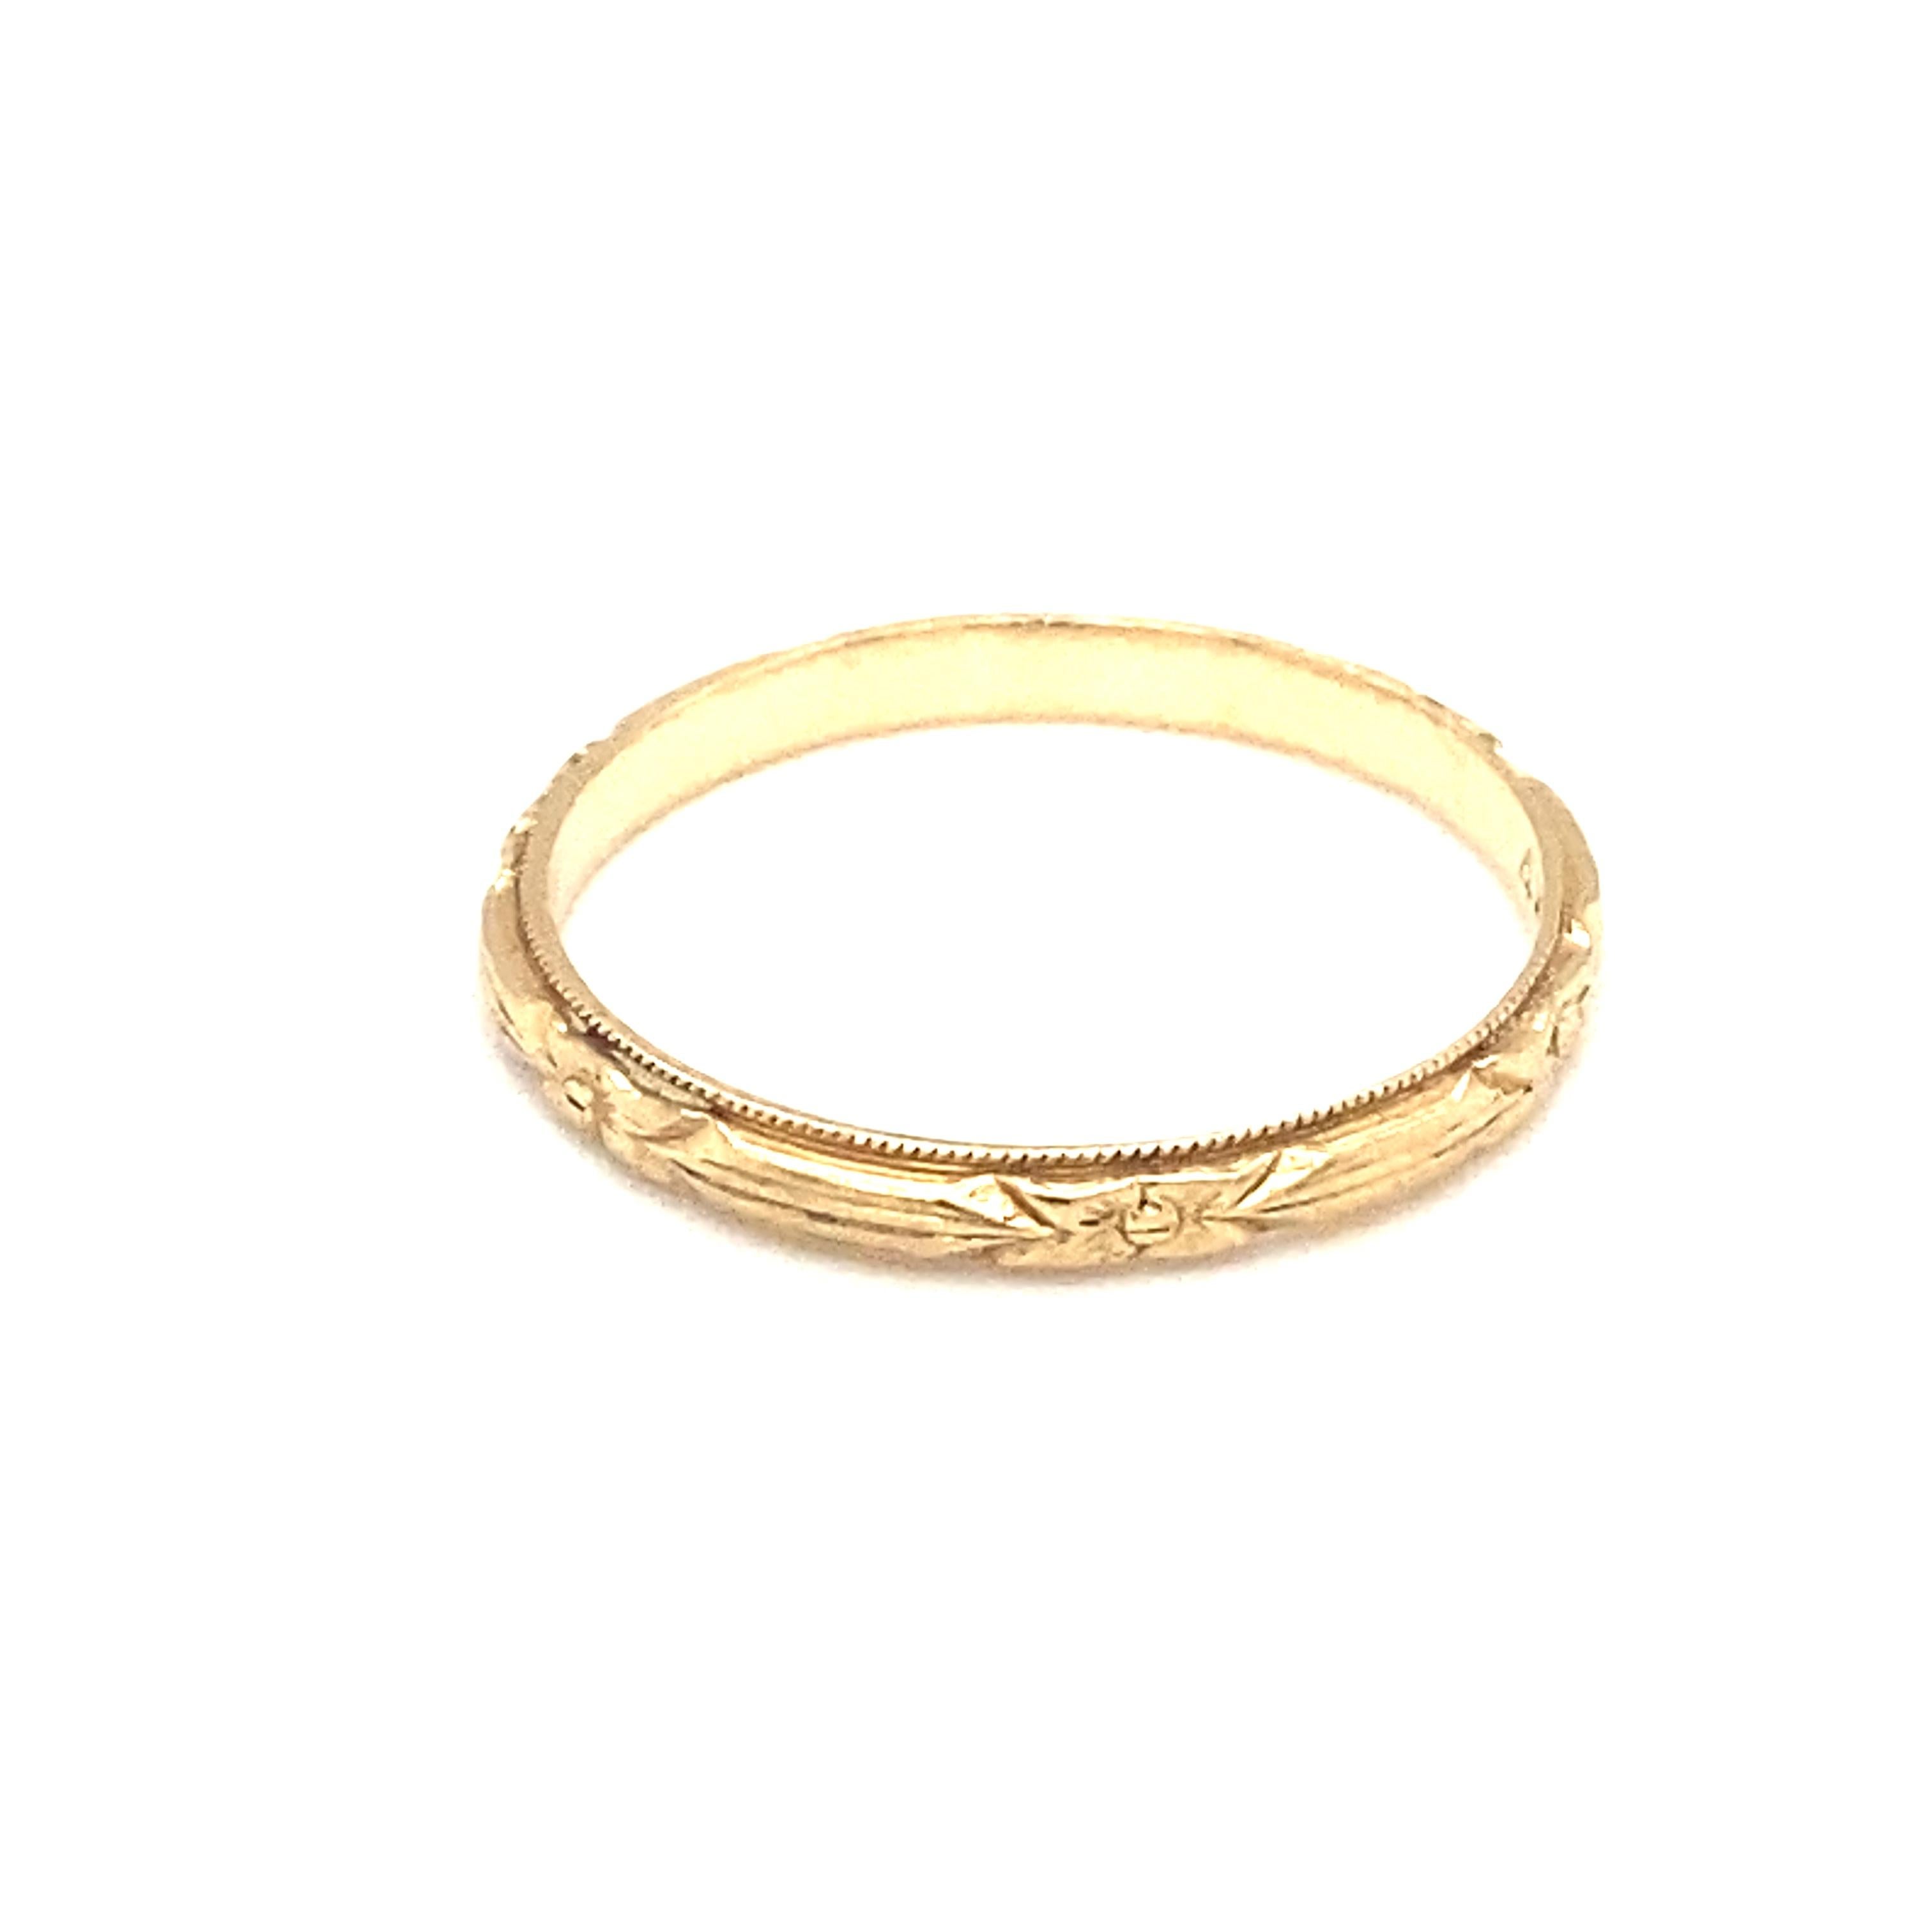 Circa 1920s Art Deco Floral Design Wedding Band in 14 Karat Yellow Gold For Sale 1